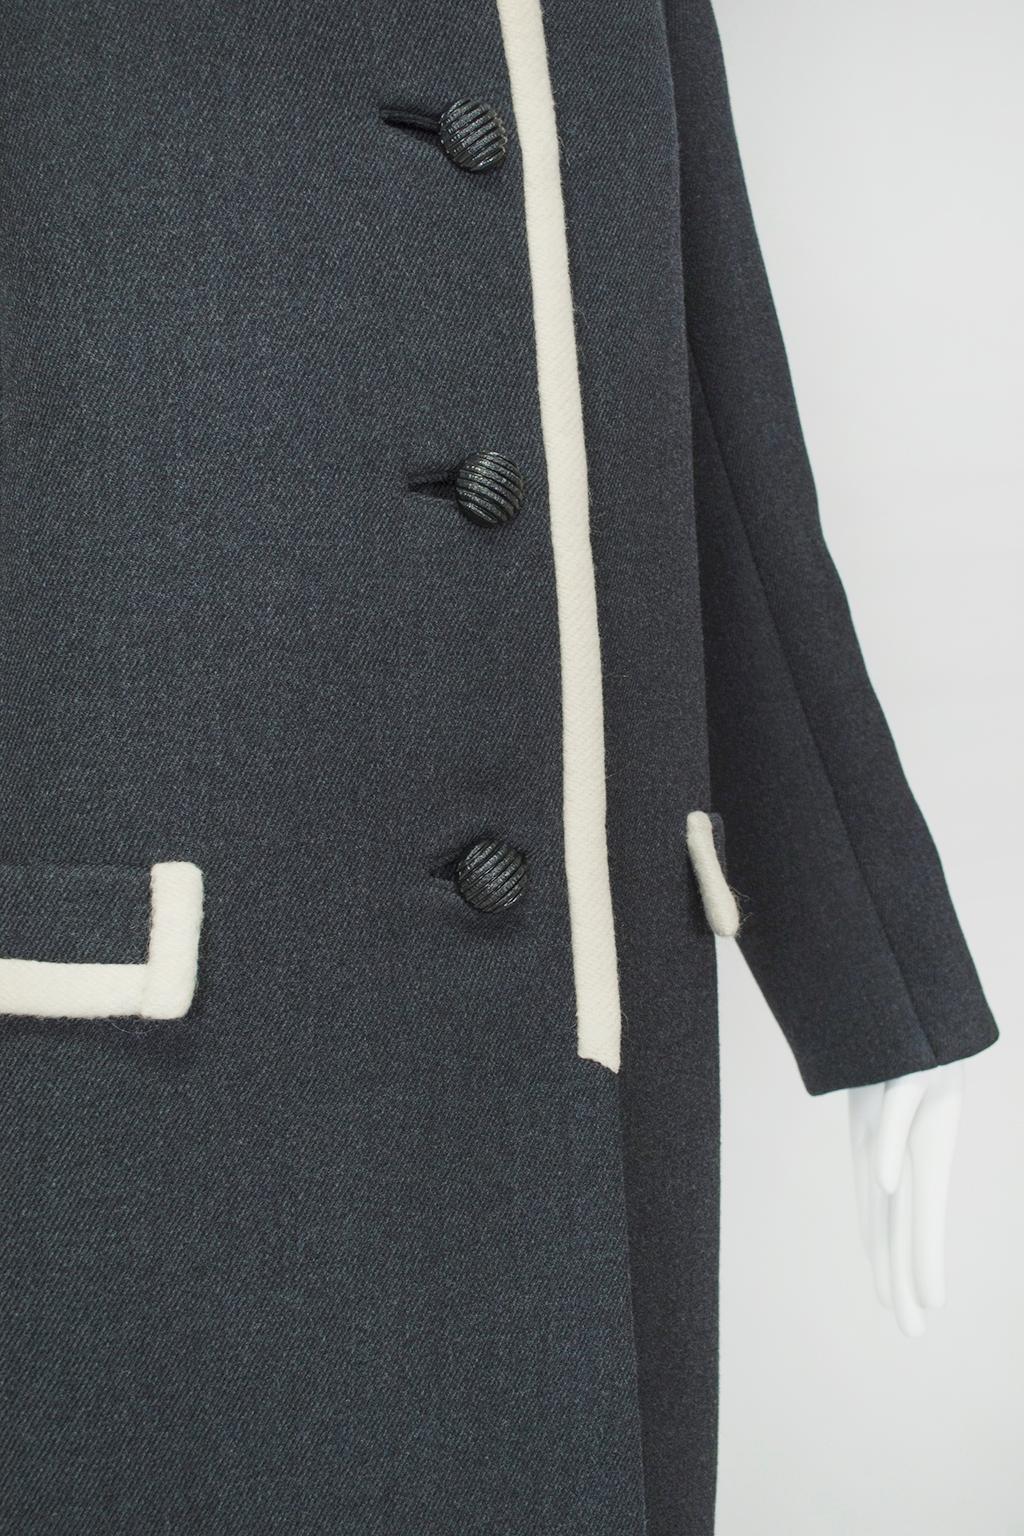 B Zuckerman Mod Jackie O Charcoal Wool Contrast Coat and Skirt Set - M-L, 1960s In Good Condition For Sale In Tucson, AZ